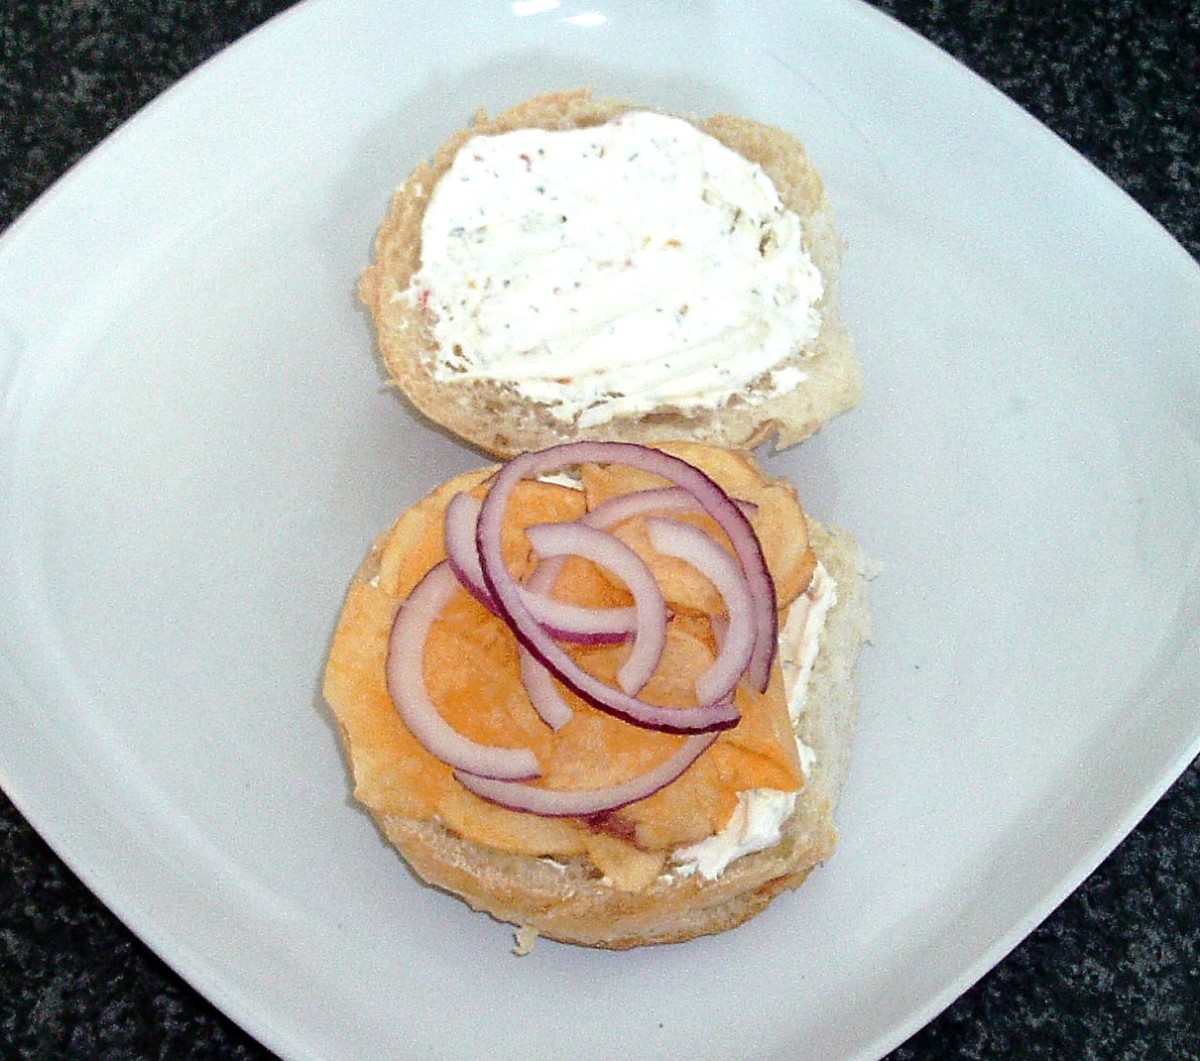 Herb and spice cream cheese is spread on bread roll before cheese and onion crisps and red onion slices are added